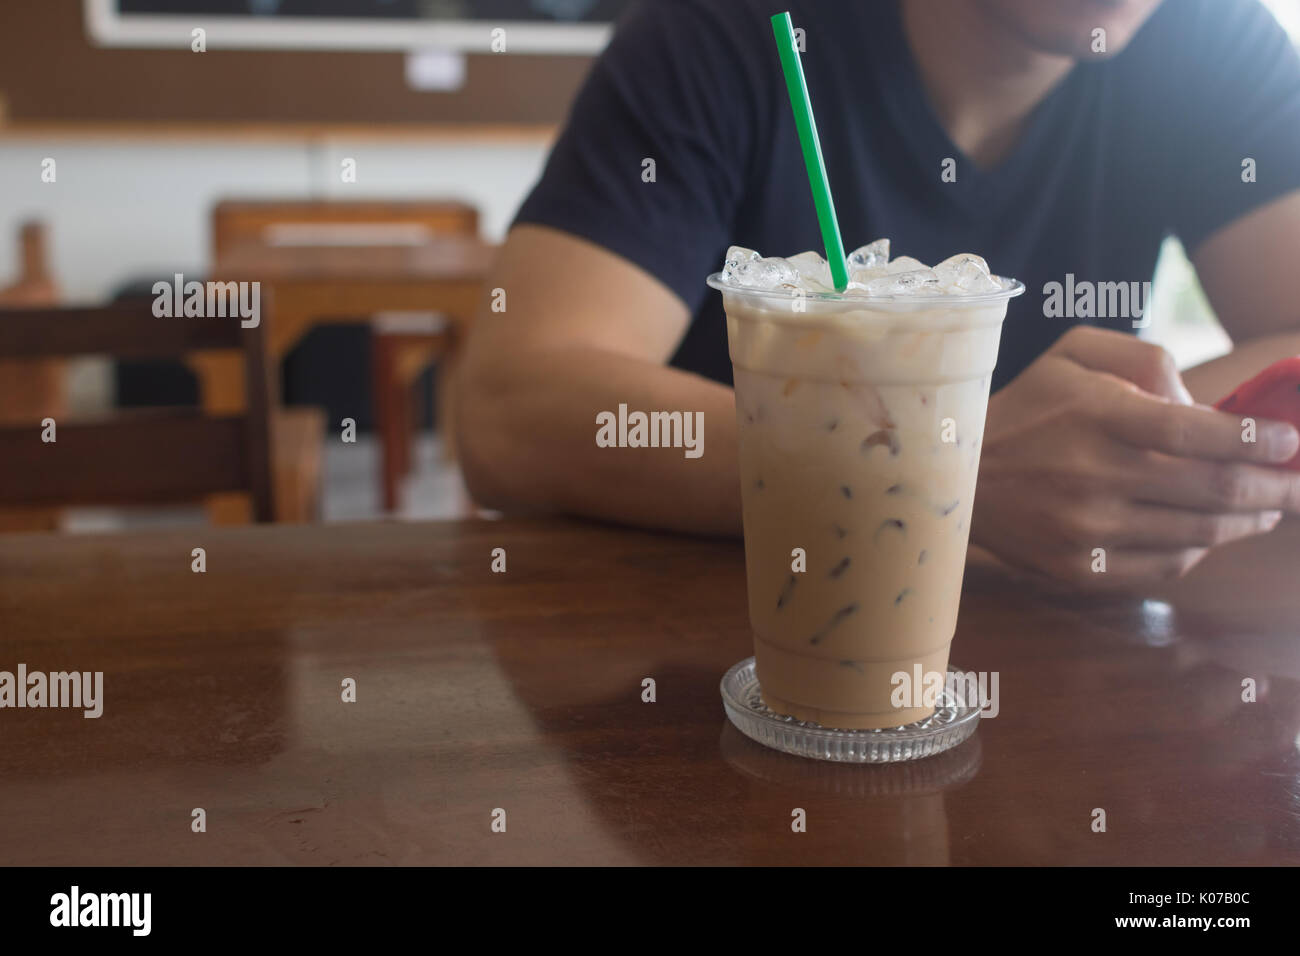 https://c8.alamy.com/comp/K07B0C/iced-coffee-in-take-away-cup-plastic-glass-on-the-wood-table-in-cafe-K07B0C.jpg